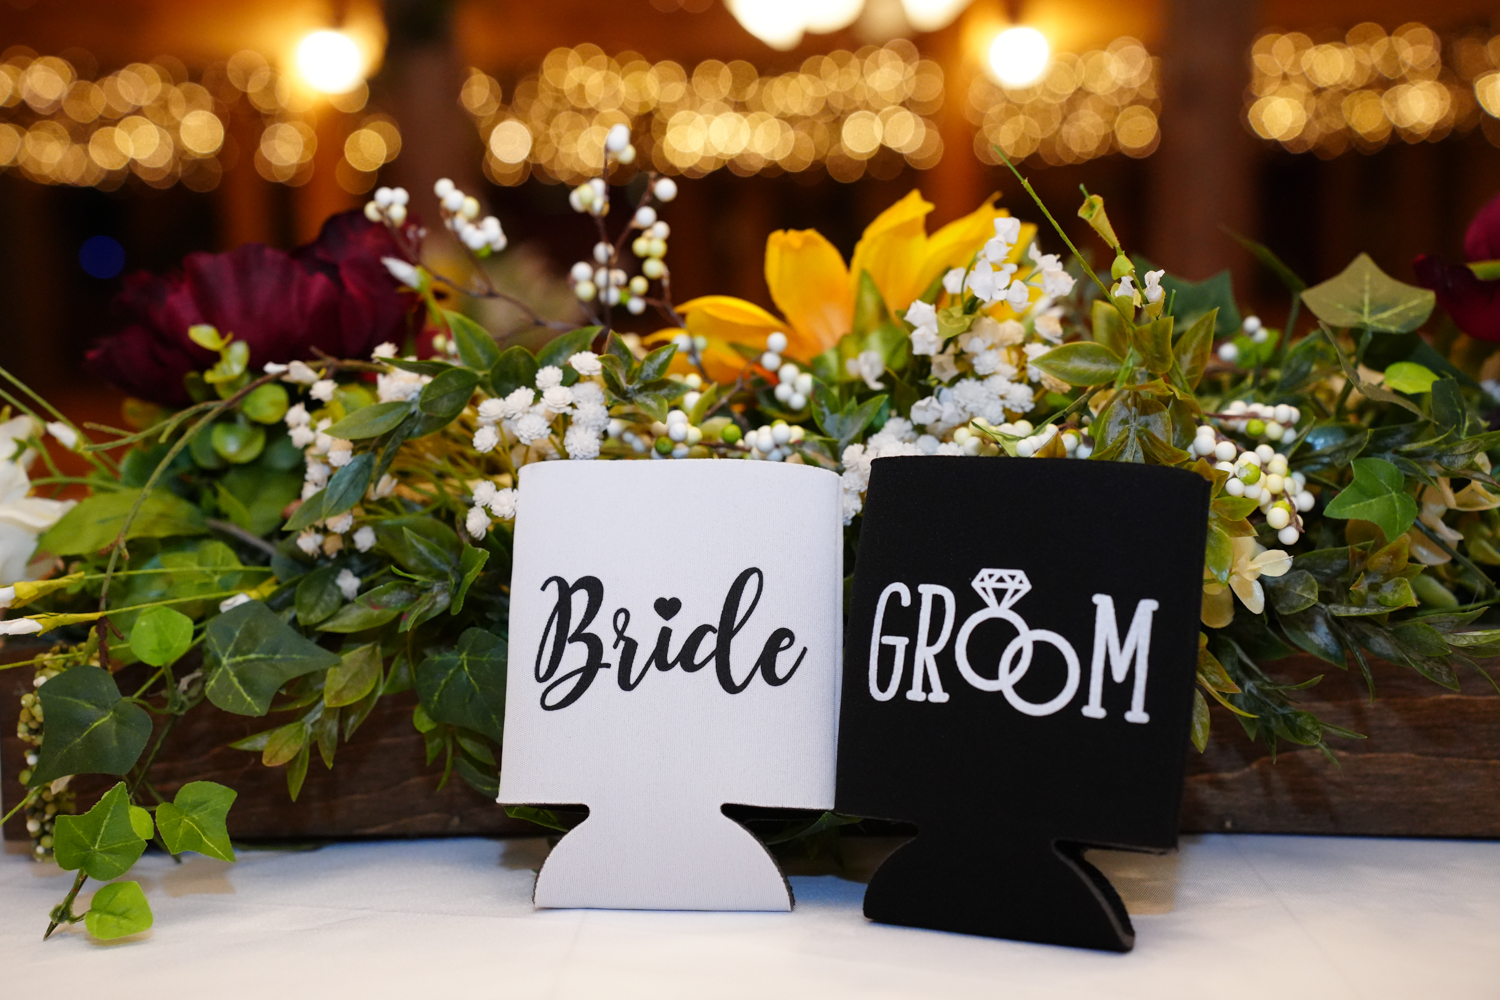 Bride and groom koozies sitting on the head table of a reception area with warm string lights behind them